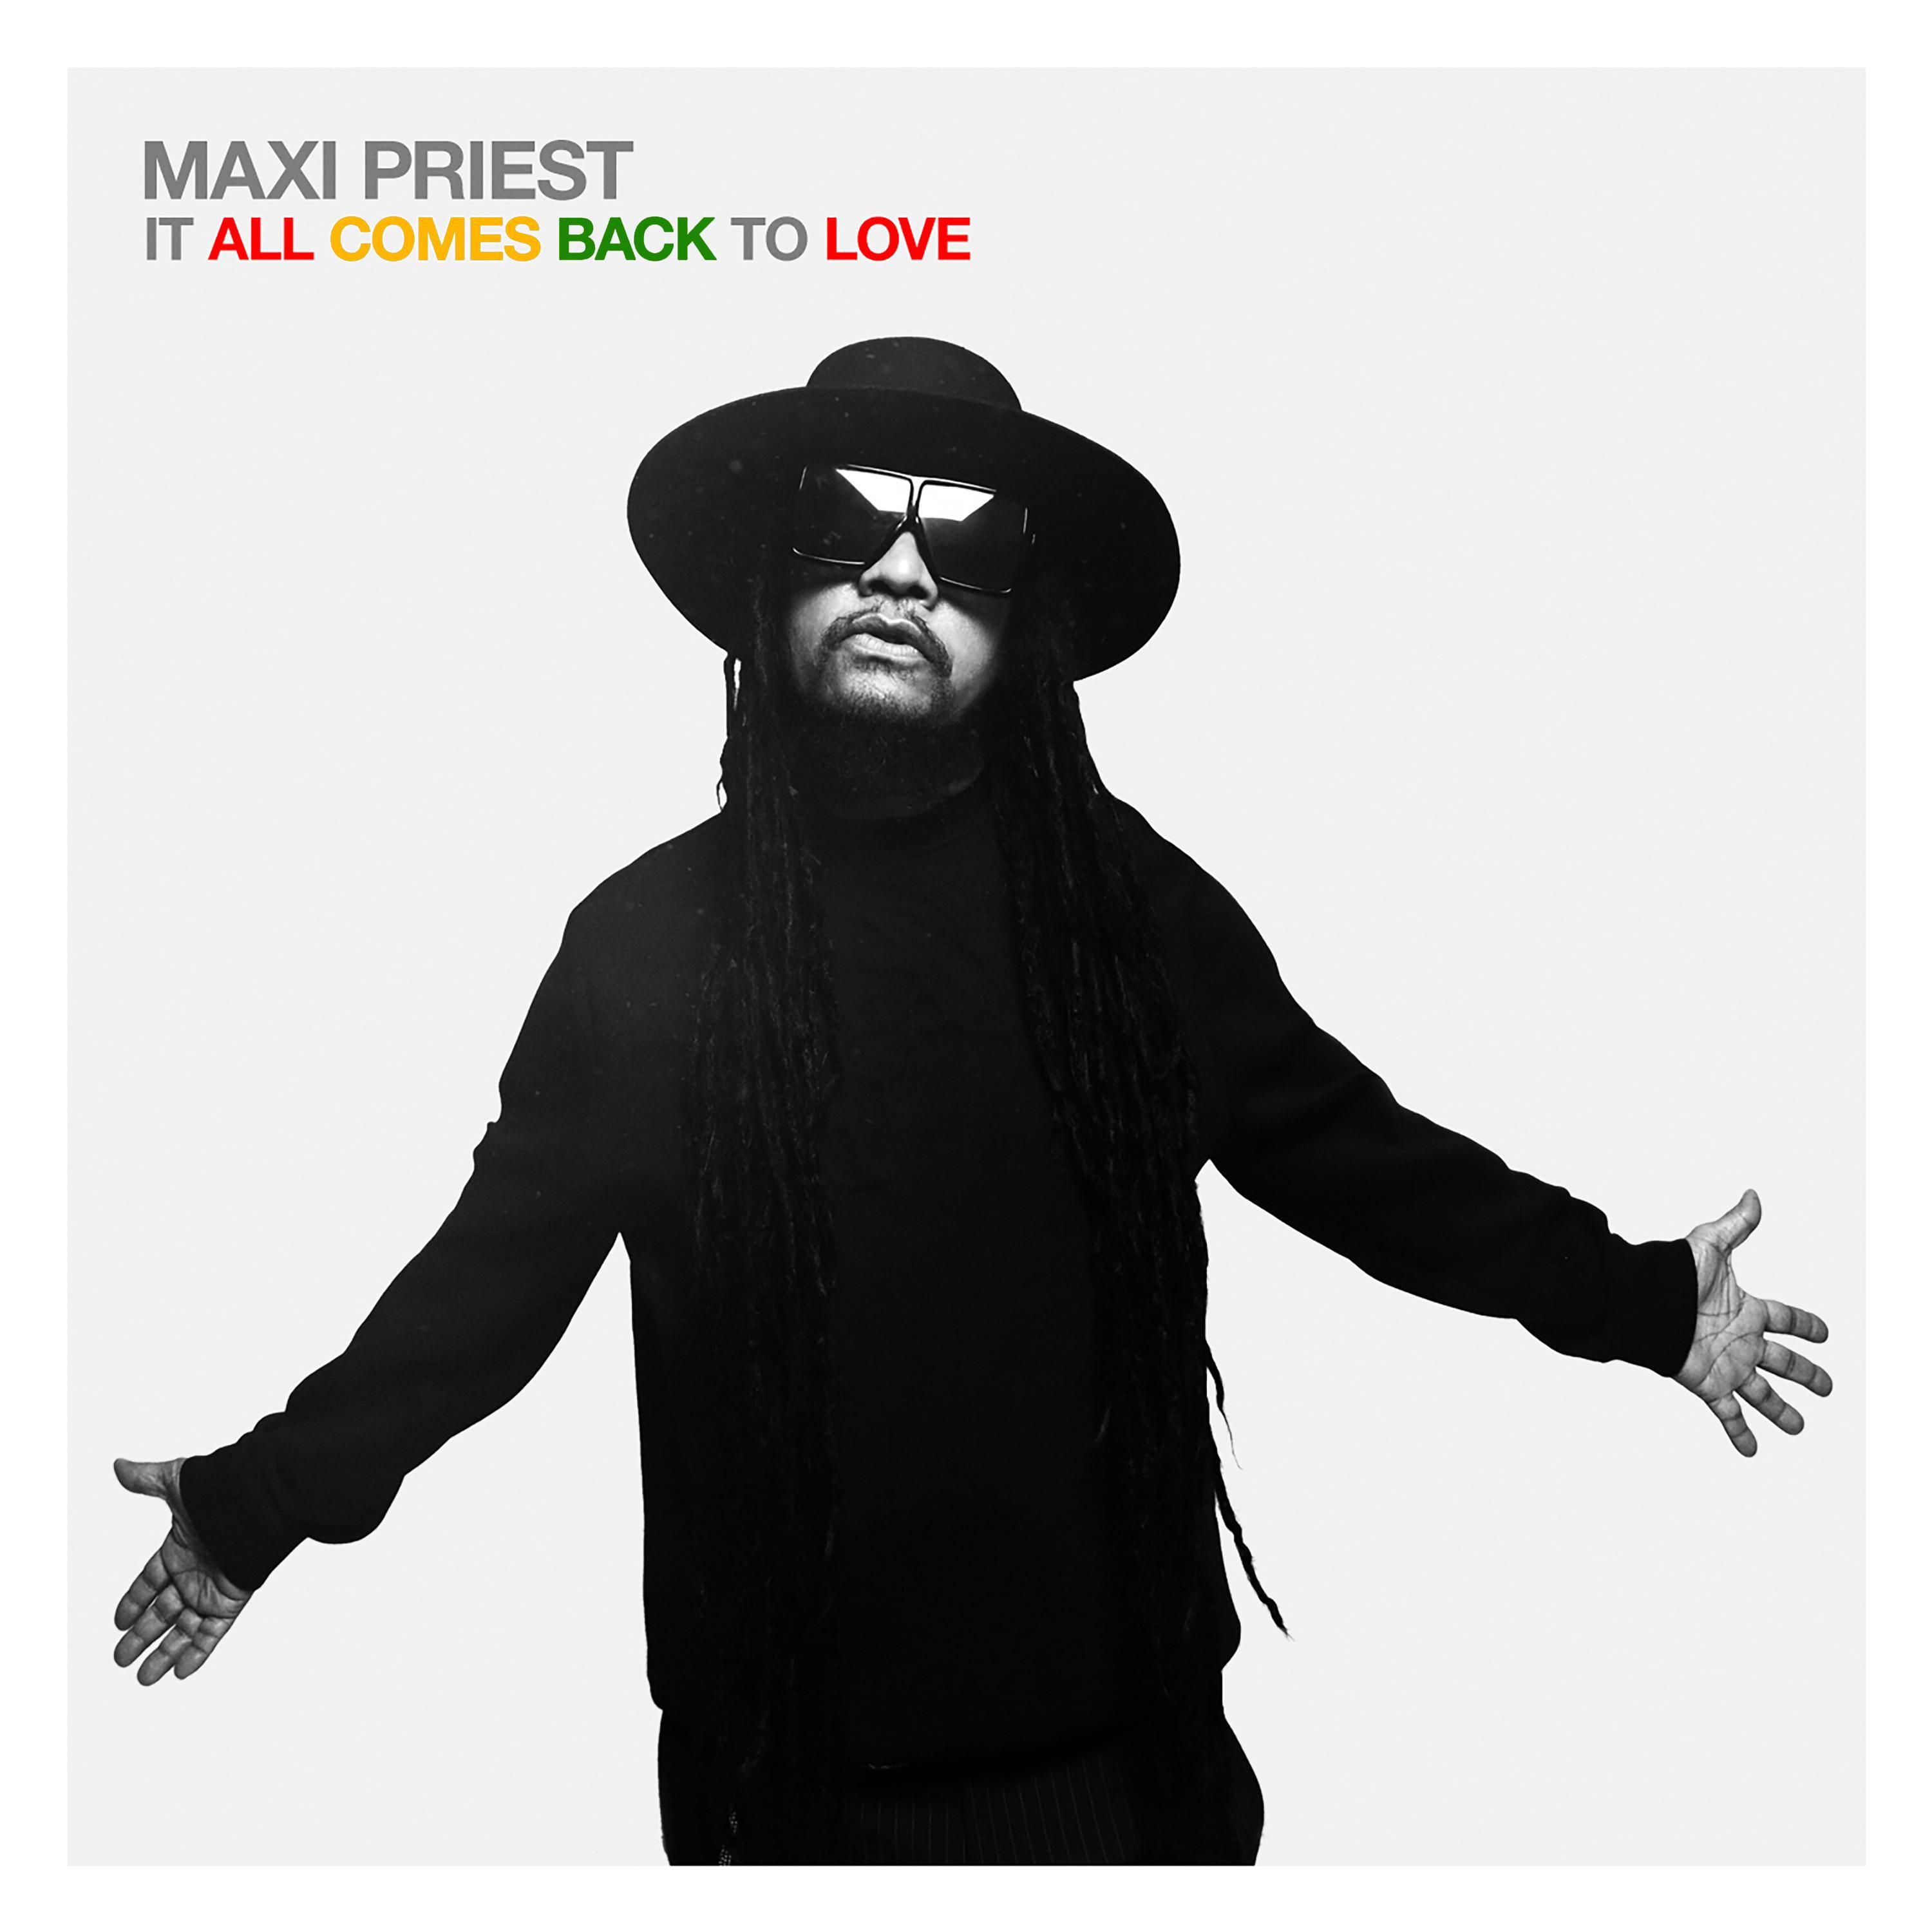 Maxi Priest - Anything You Want (feat. Estelle, Anthony Hamilton, Shaggy)